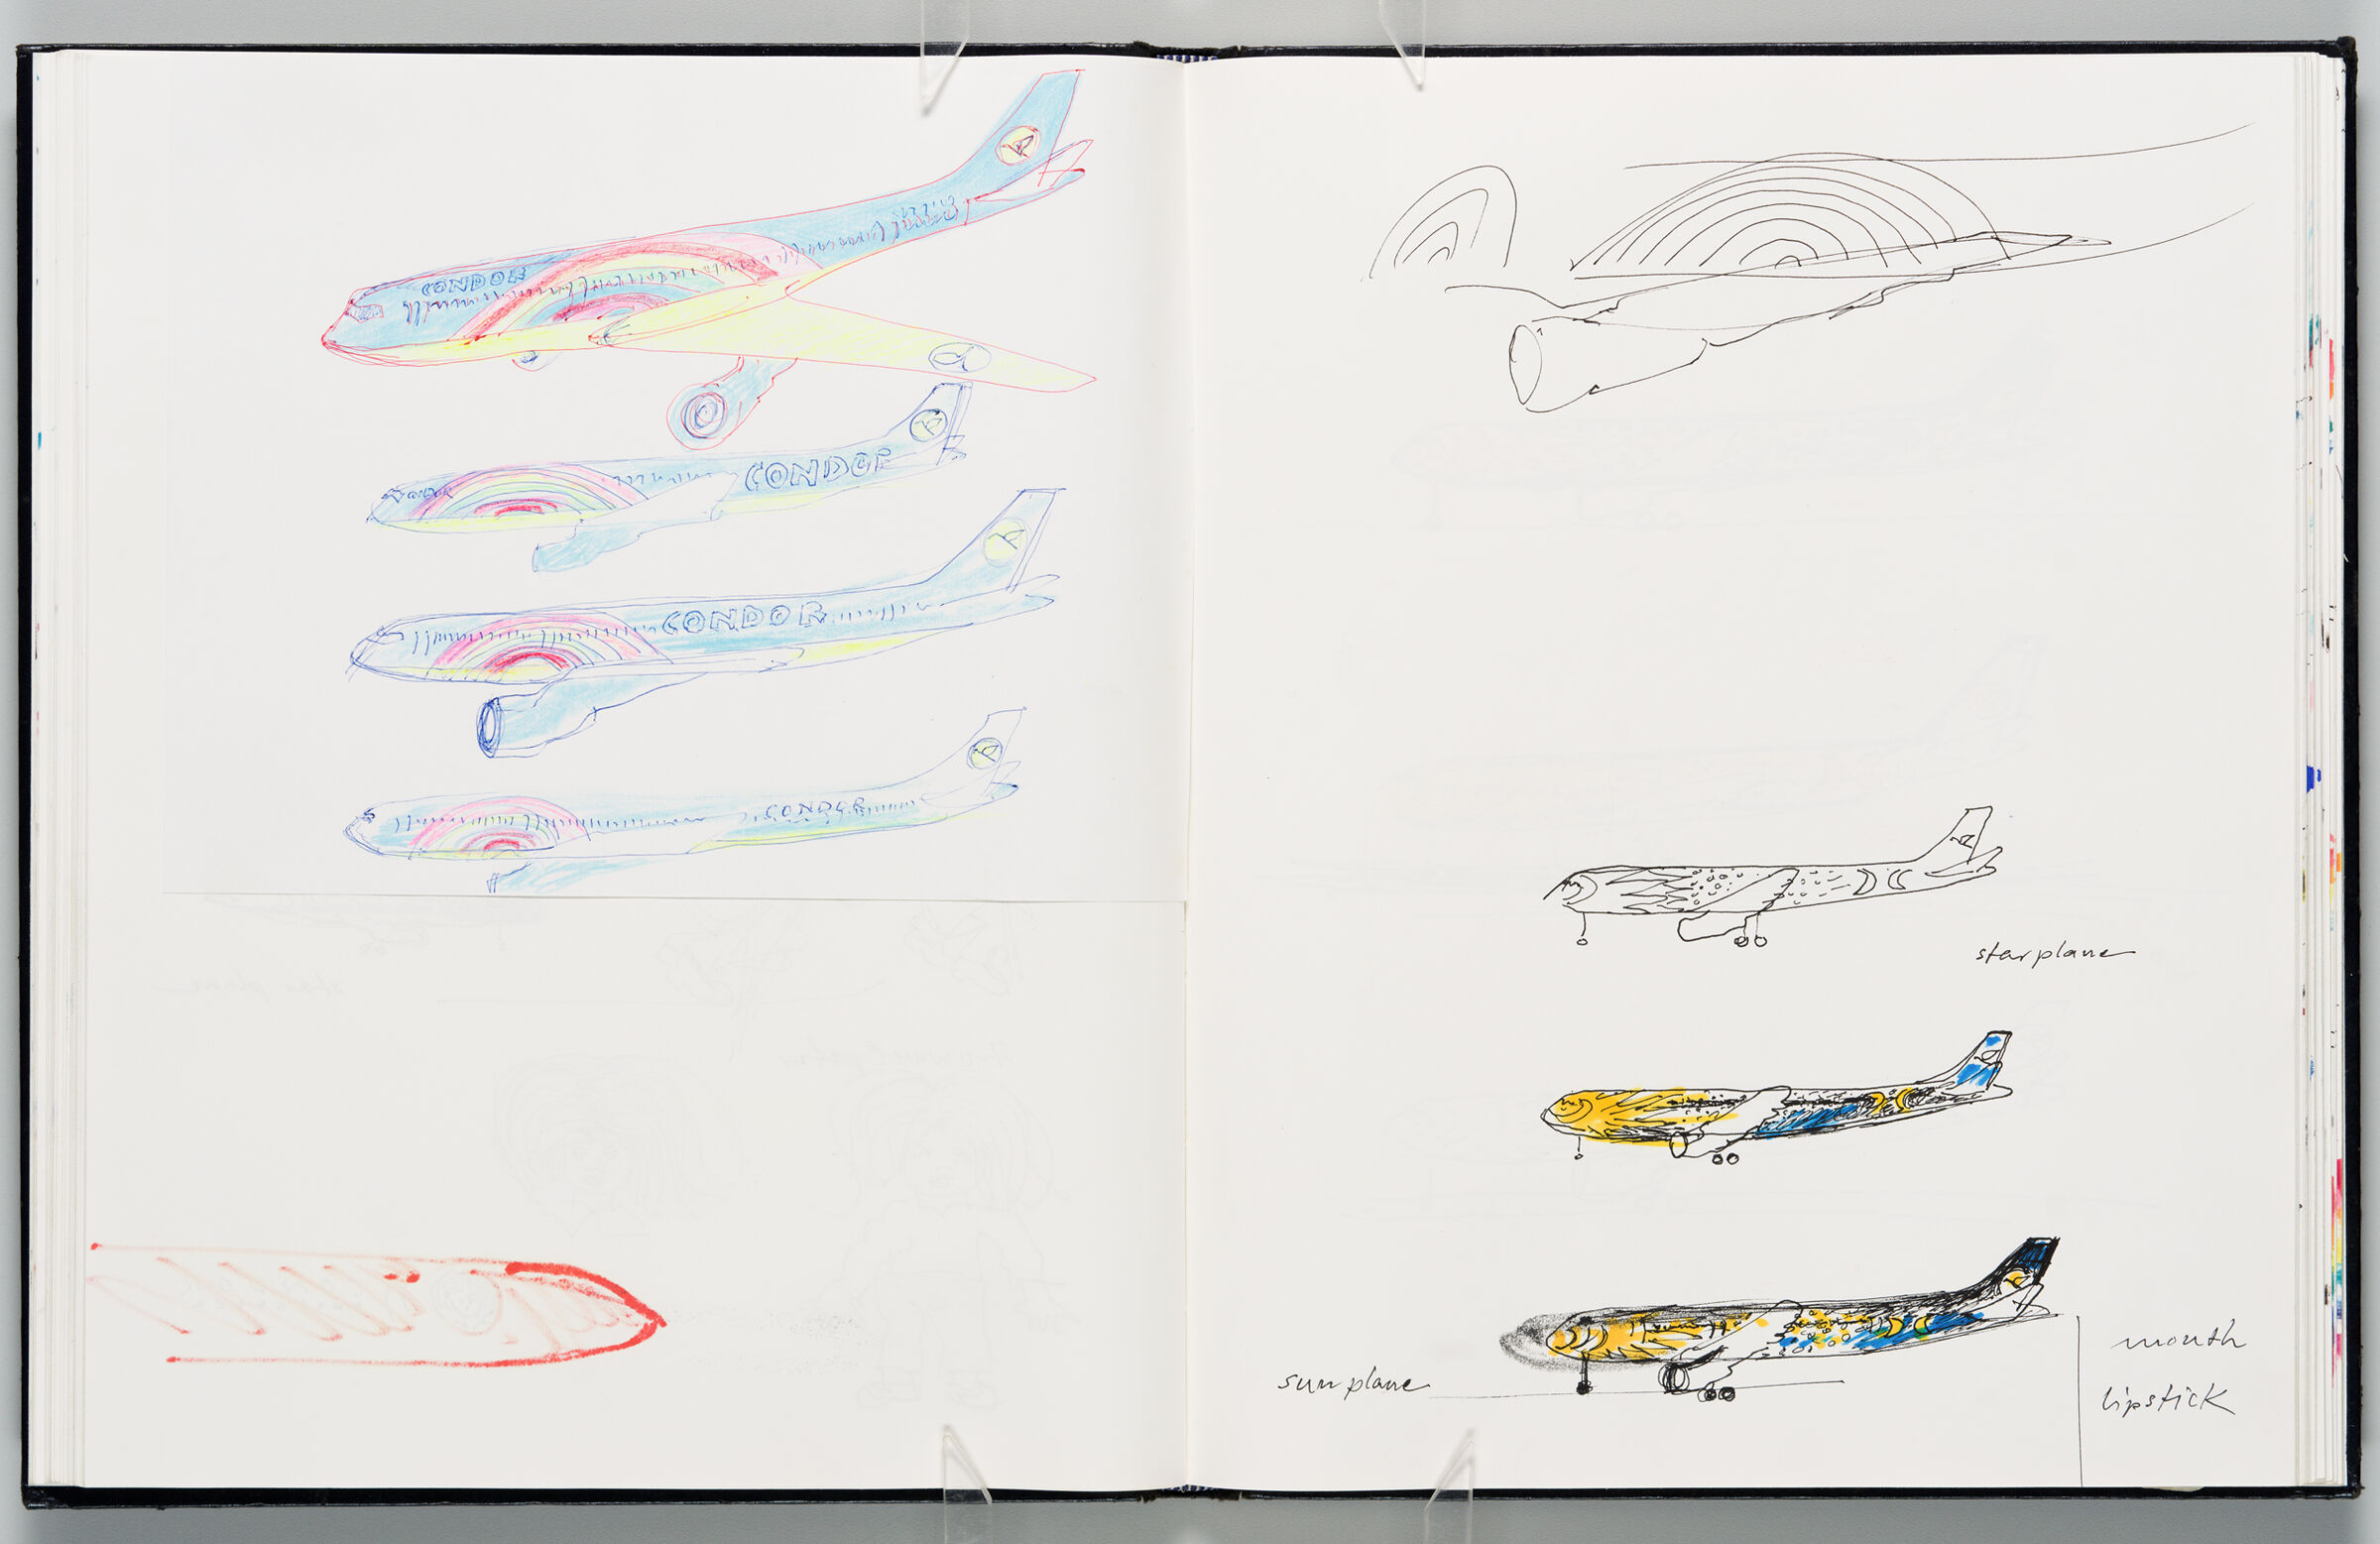 Untitled (Bleed-Through Of Previous Page And Adhered Sheet With Rainbow Designs For Condor Planes, Left Page); Untitled (Star- And Sun Plane Designs For Condor, Right Page)